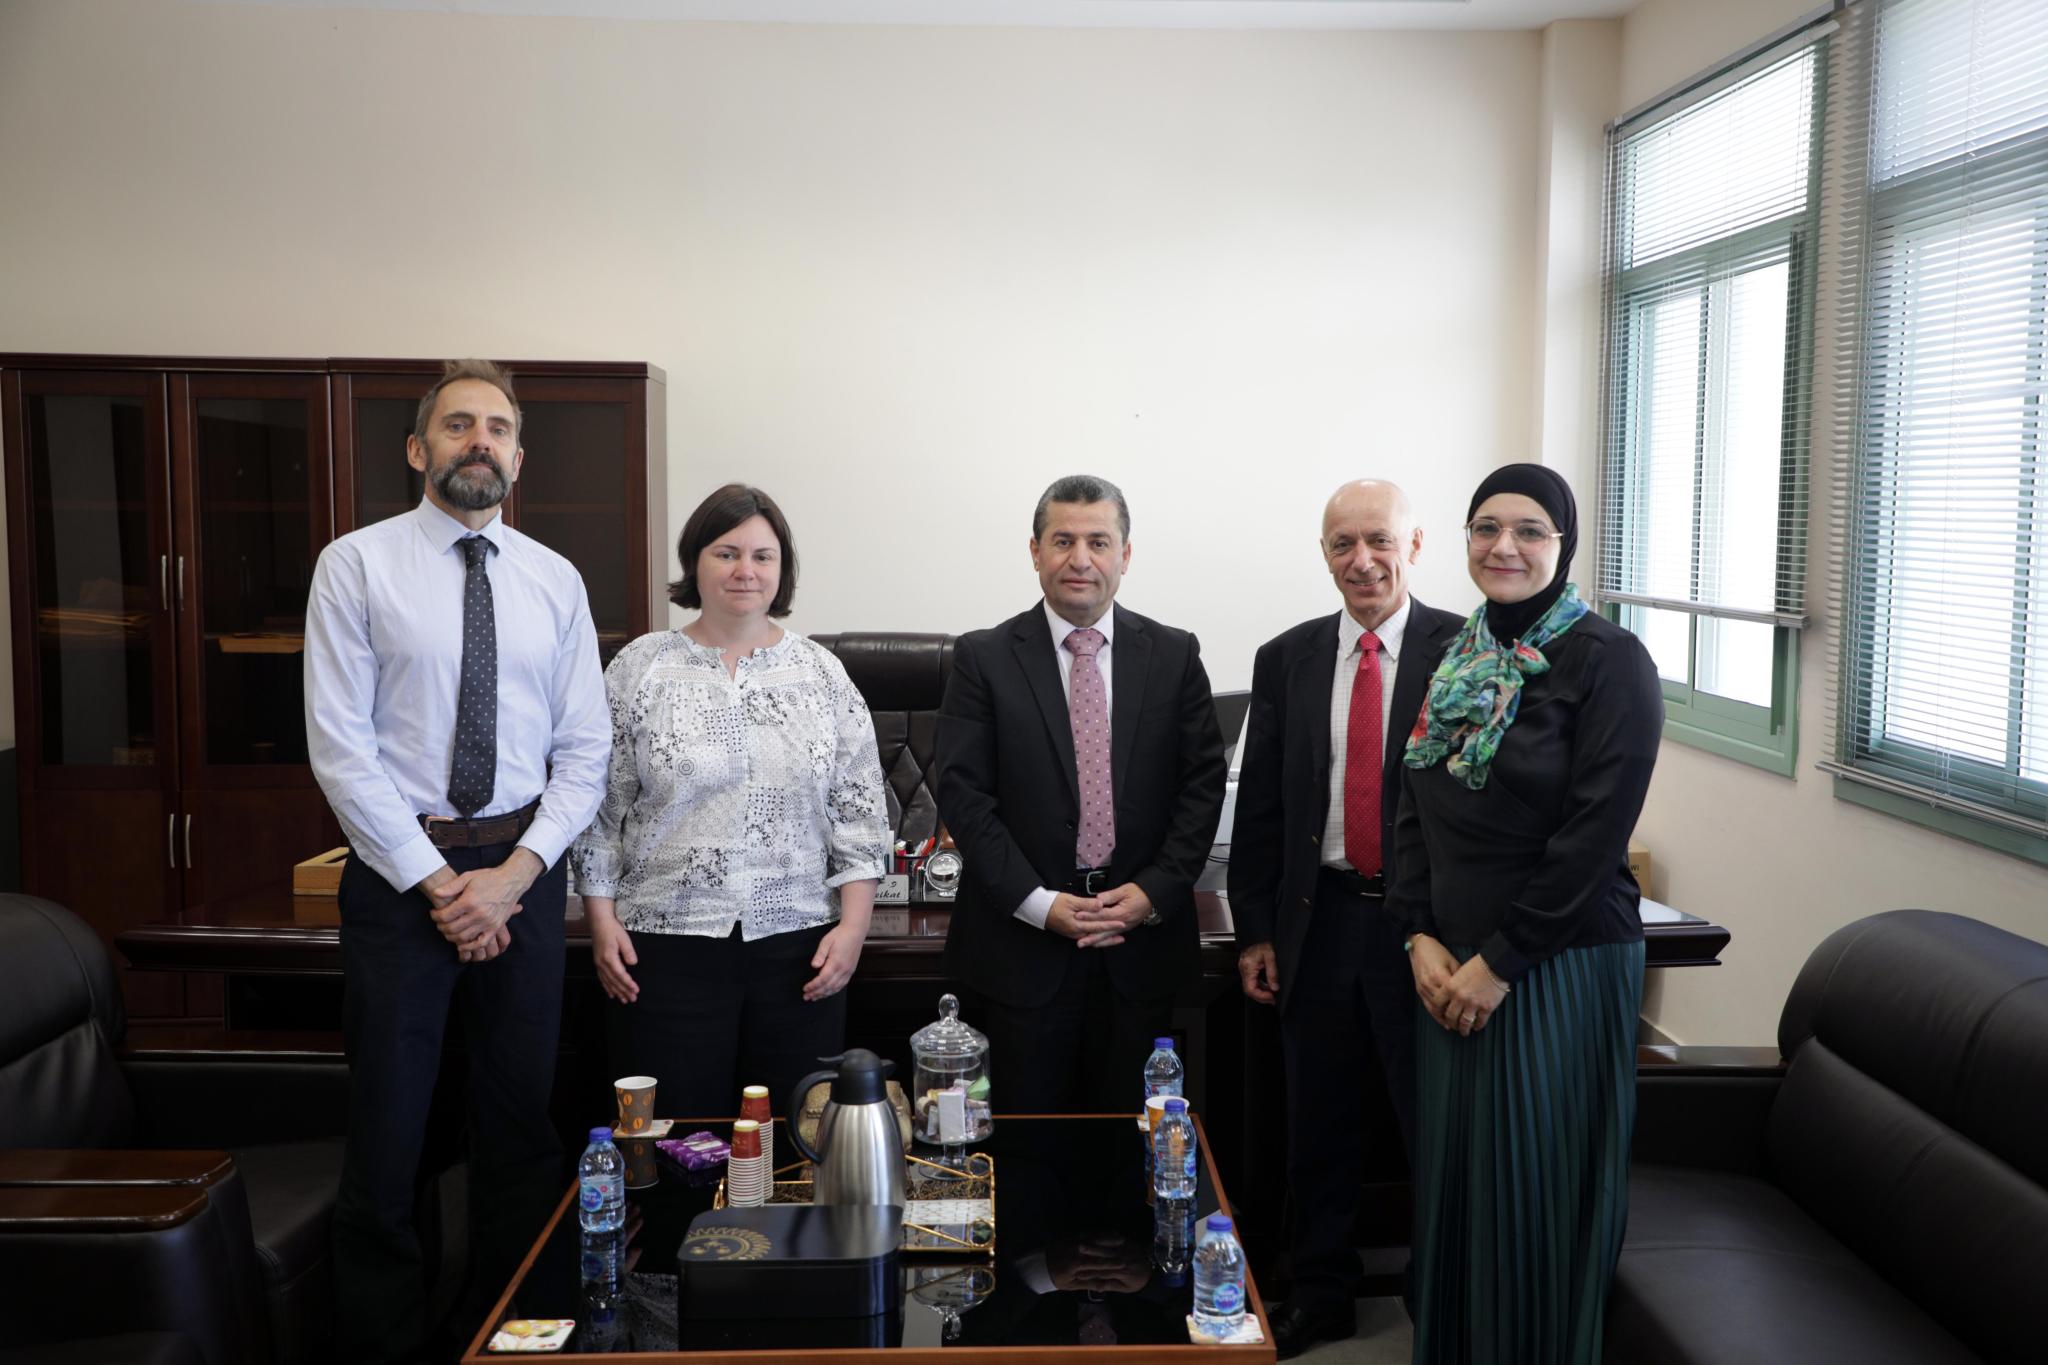 A Delegation from Faculty of Medicine at the University of Exeter, UK, Visits the University